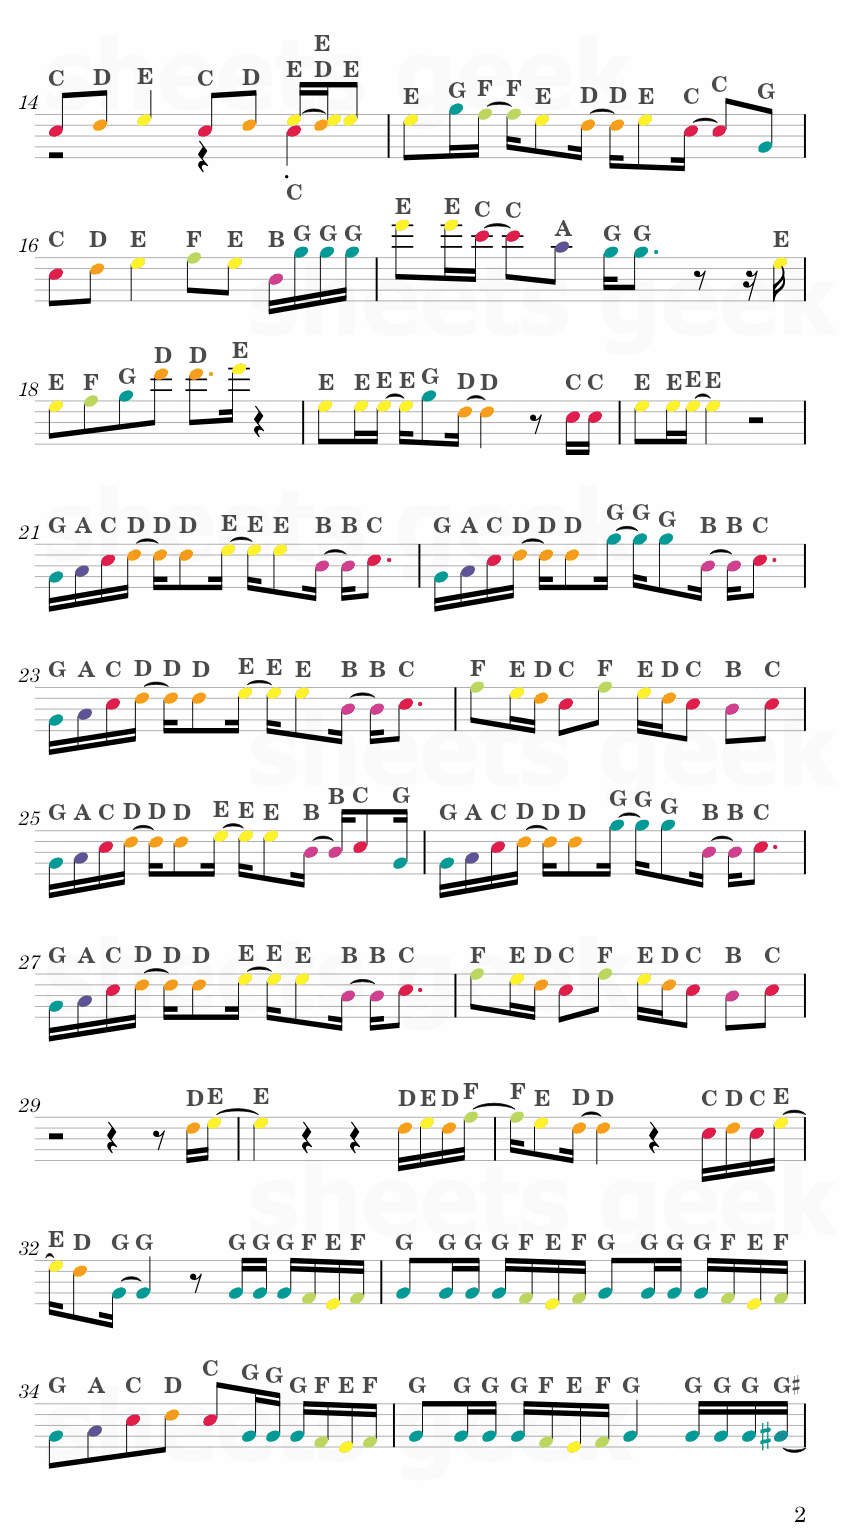 Darl+ing Darling - SEVENTEEN Easy Sheet Music Free for piano, keyboard, flute, violin, sax, cello page 2